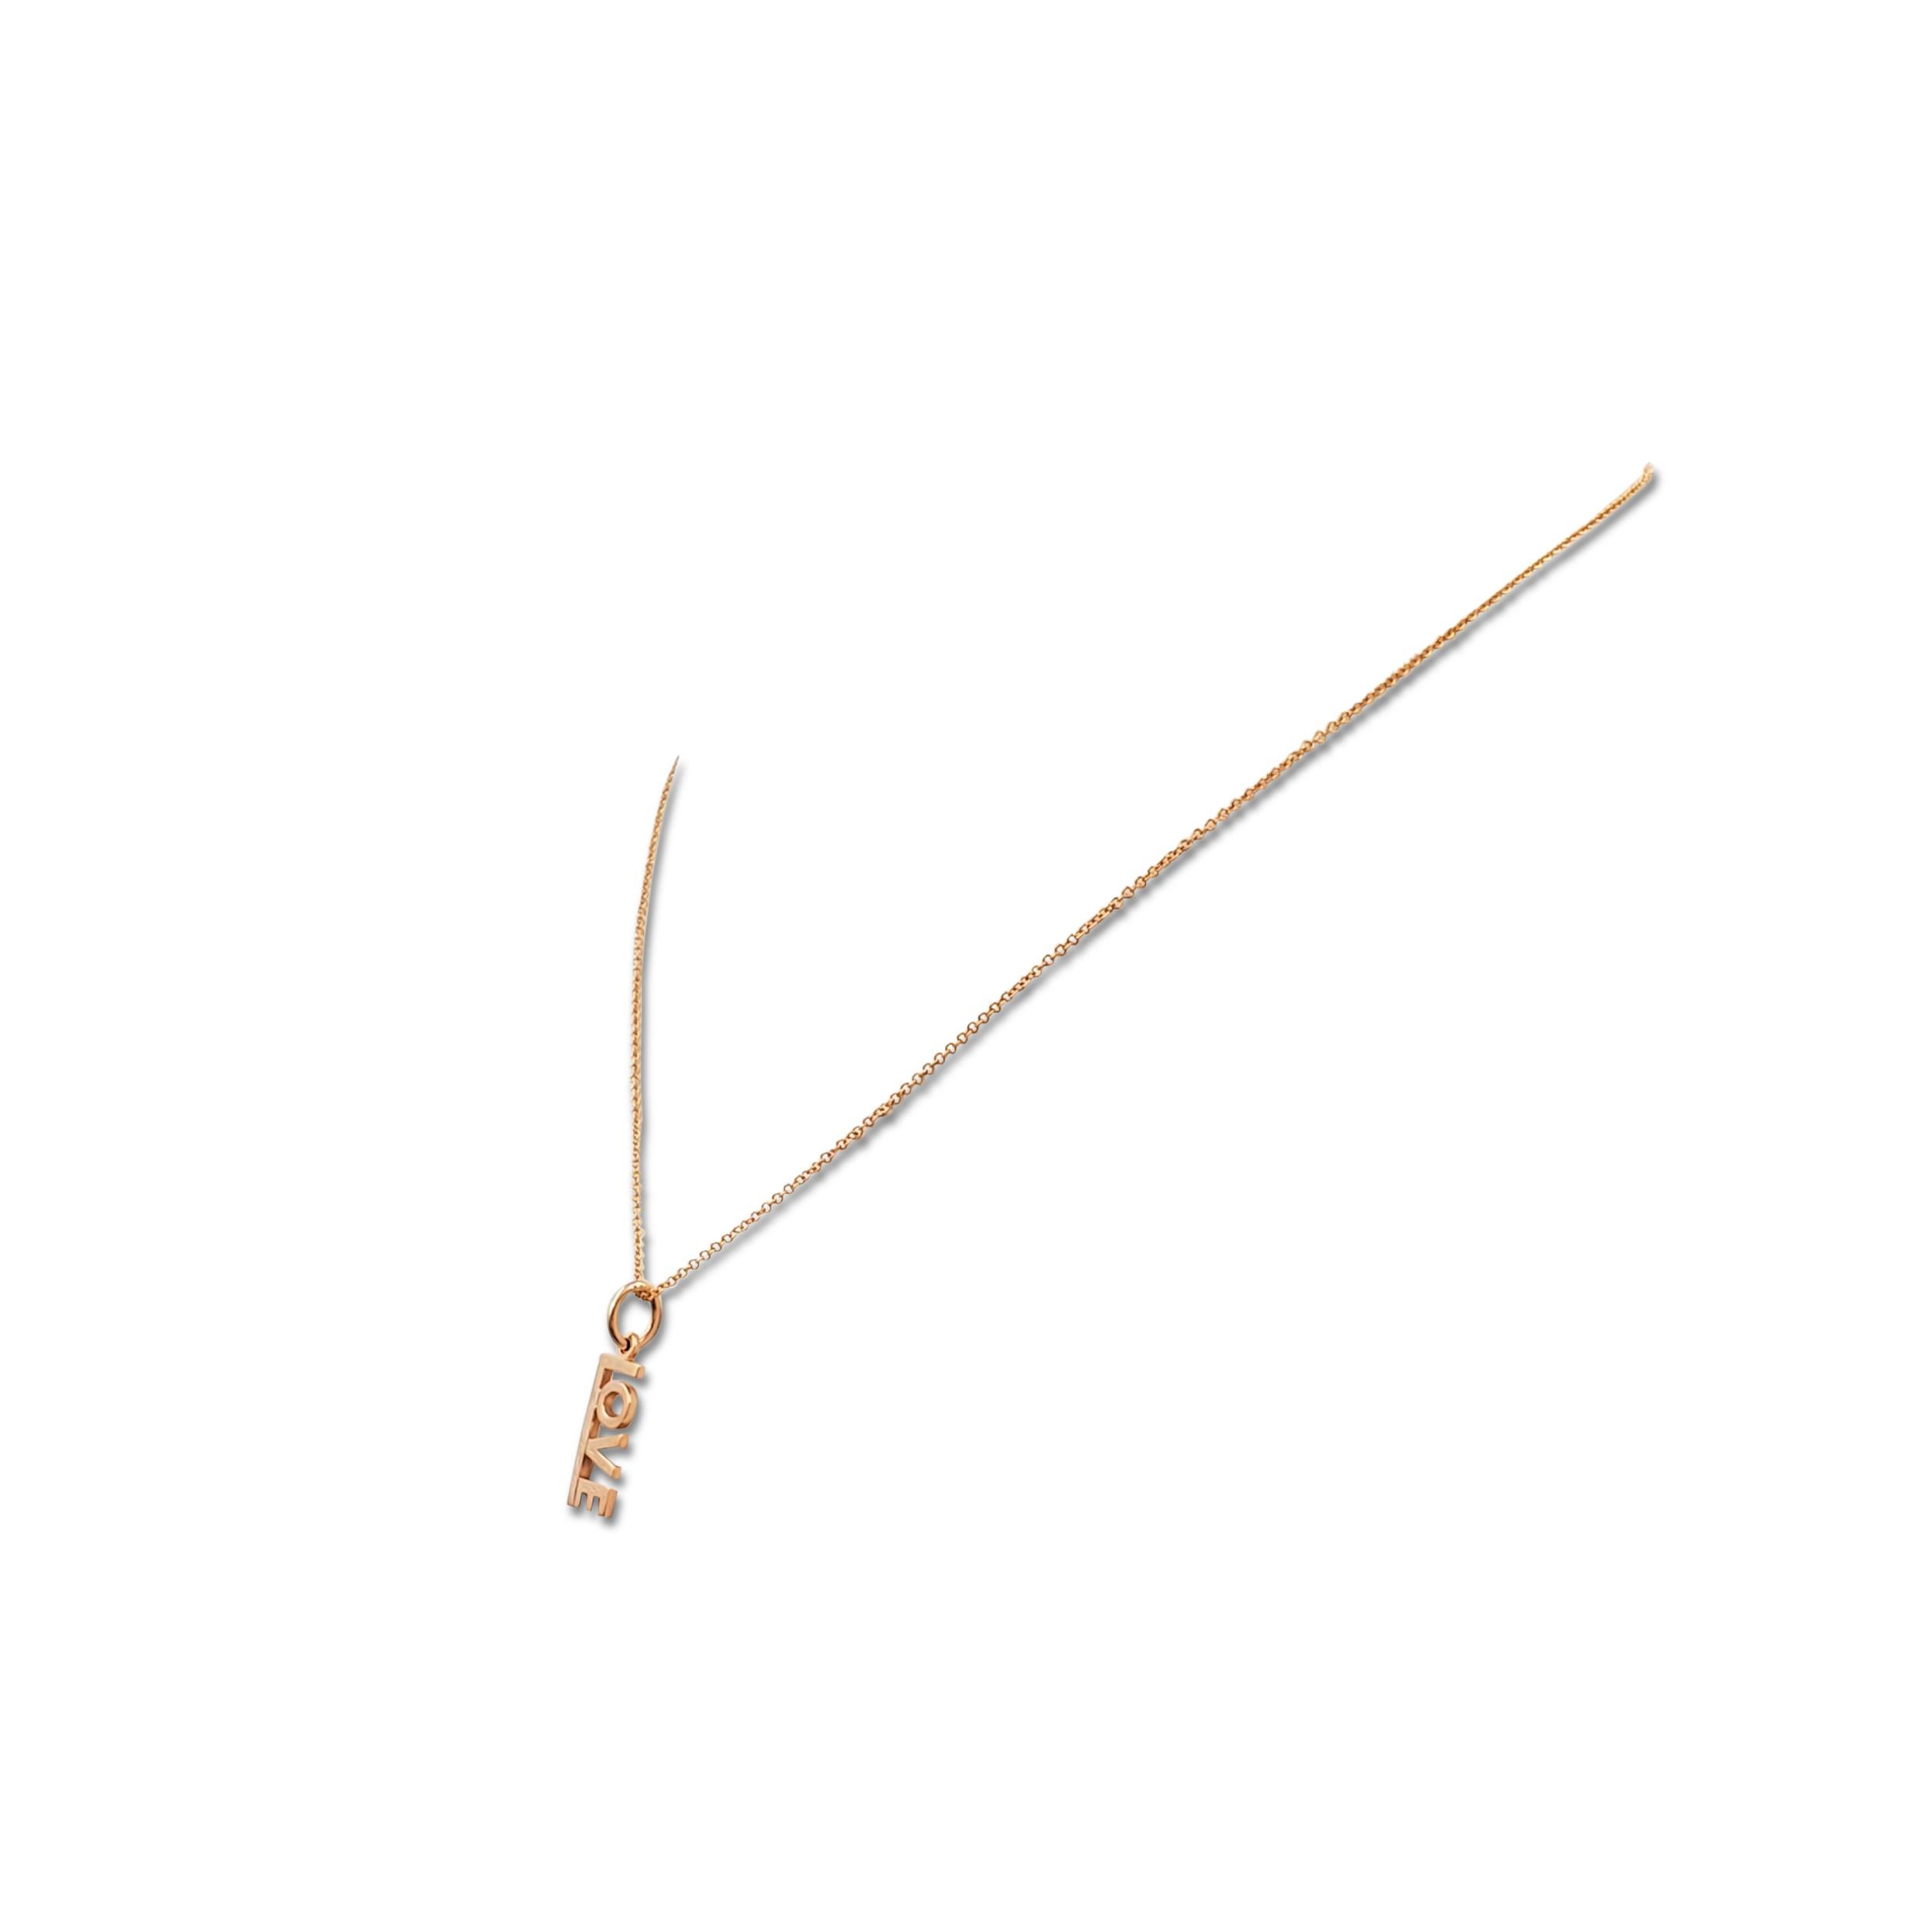 Authentic Tiffany & Co. pendant necklace crafted in 18 karat rose gold. The charming pendant spells out the word 'LOVE' and hangs from a delicate rose gold chain. Signed T&Co., 750. The necklace is presented with the original pouch, no box or